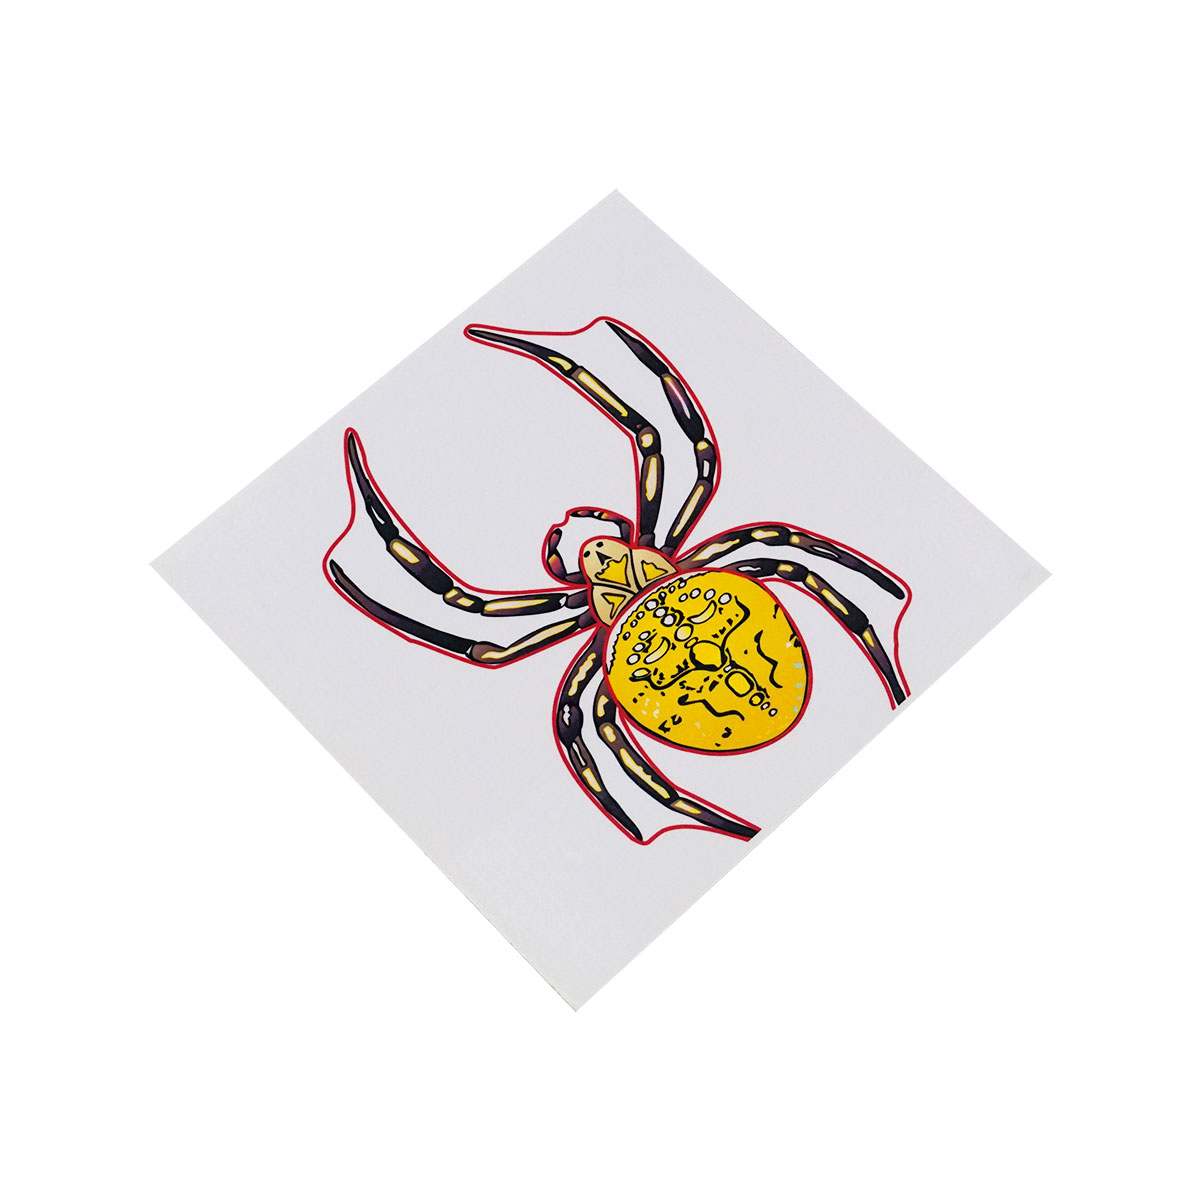 Spider Puzzle NEW Montessori Zoology Material